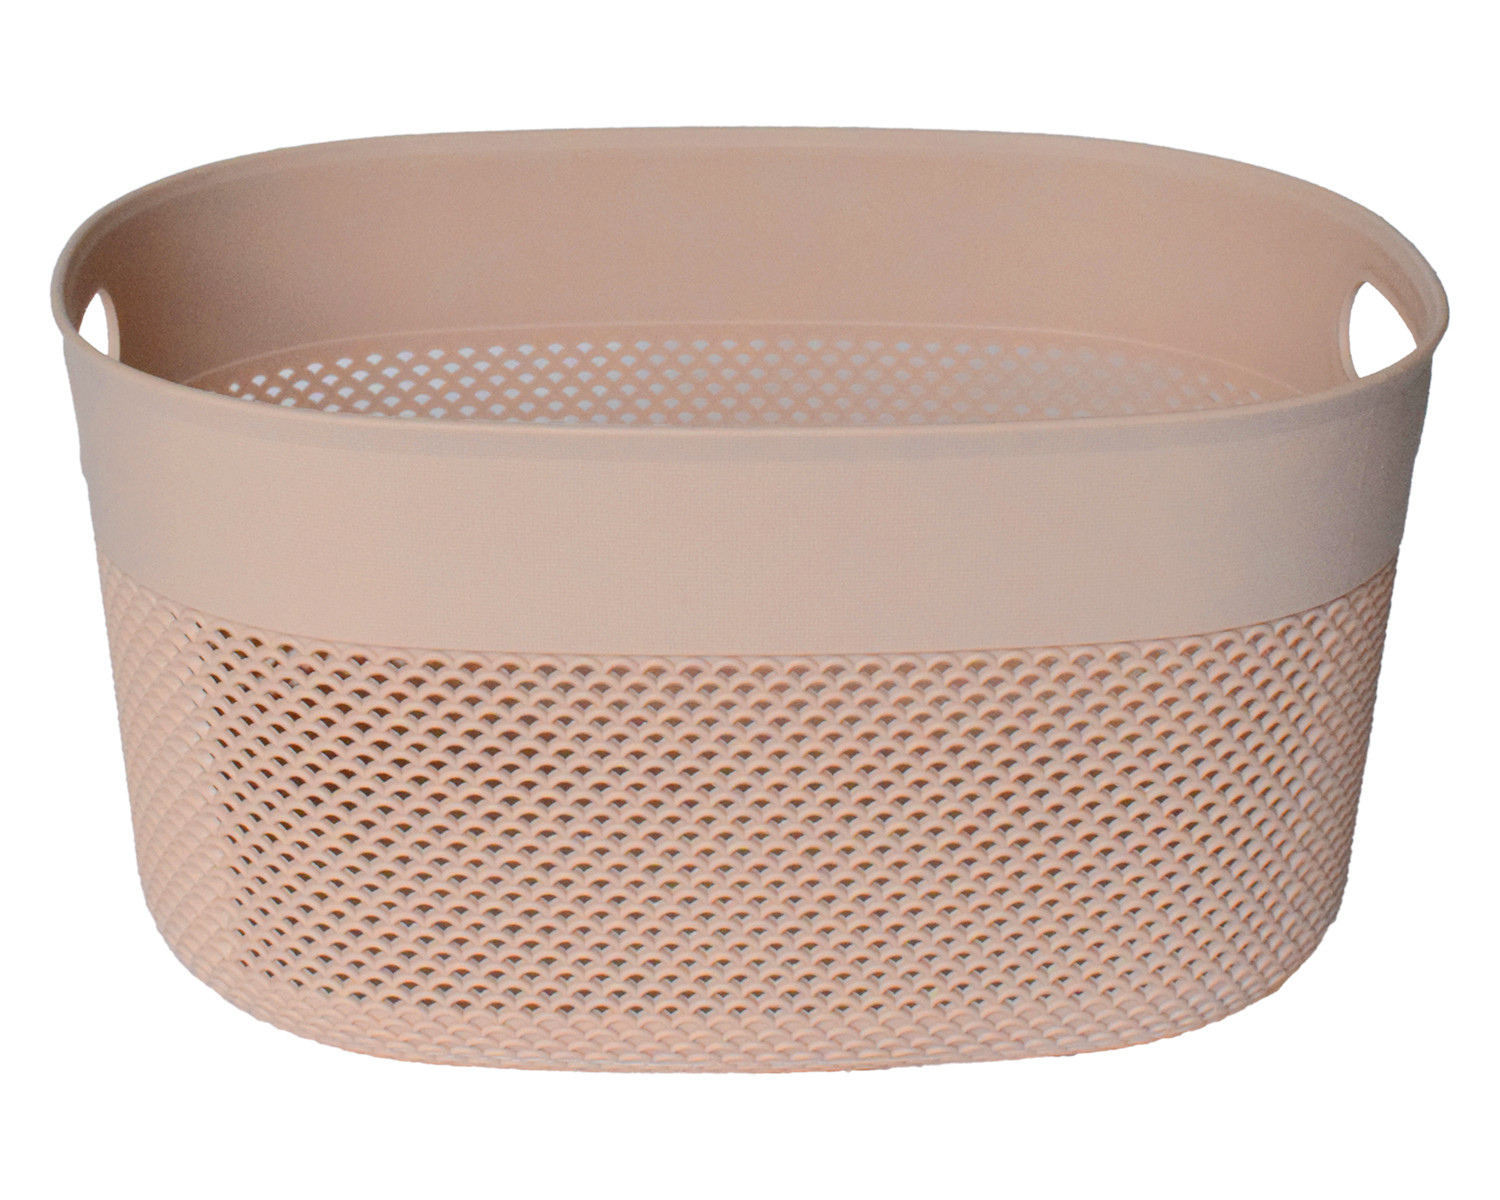 Kuber Industries Unbreakable Small Multipurpose Storage Baskets with lid|Design-Netted|Material-Plastic|Shape-Oval|Color-Beige